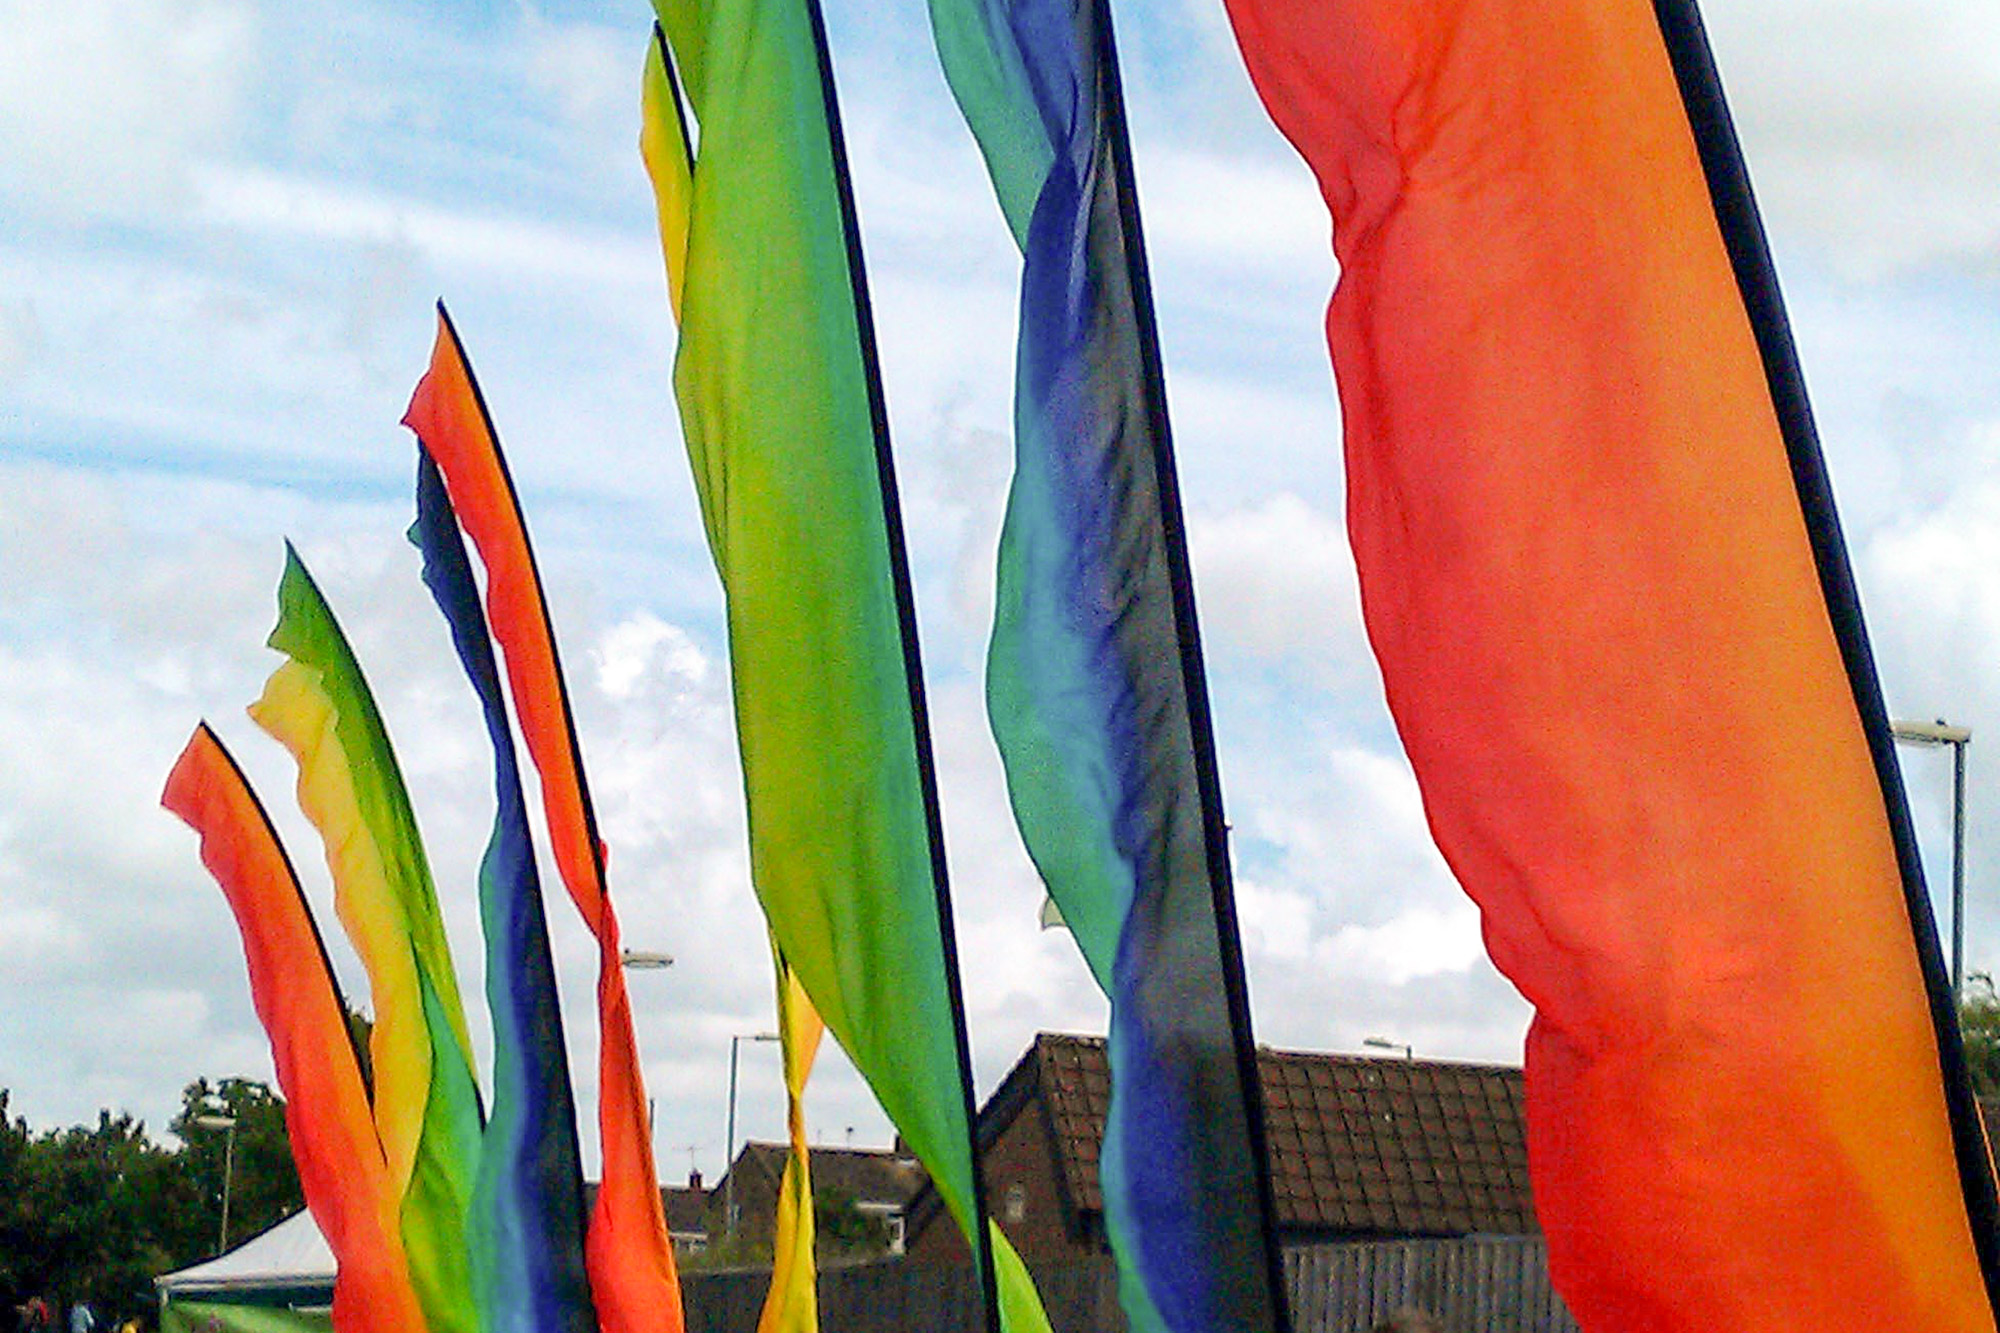 Rainbow flags at World Party in the Park 2012 Basingstoke